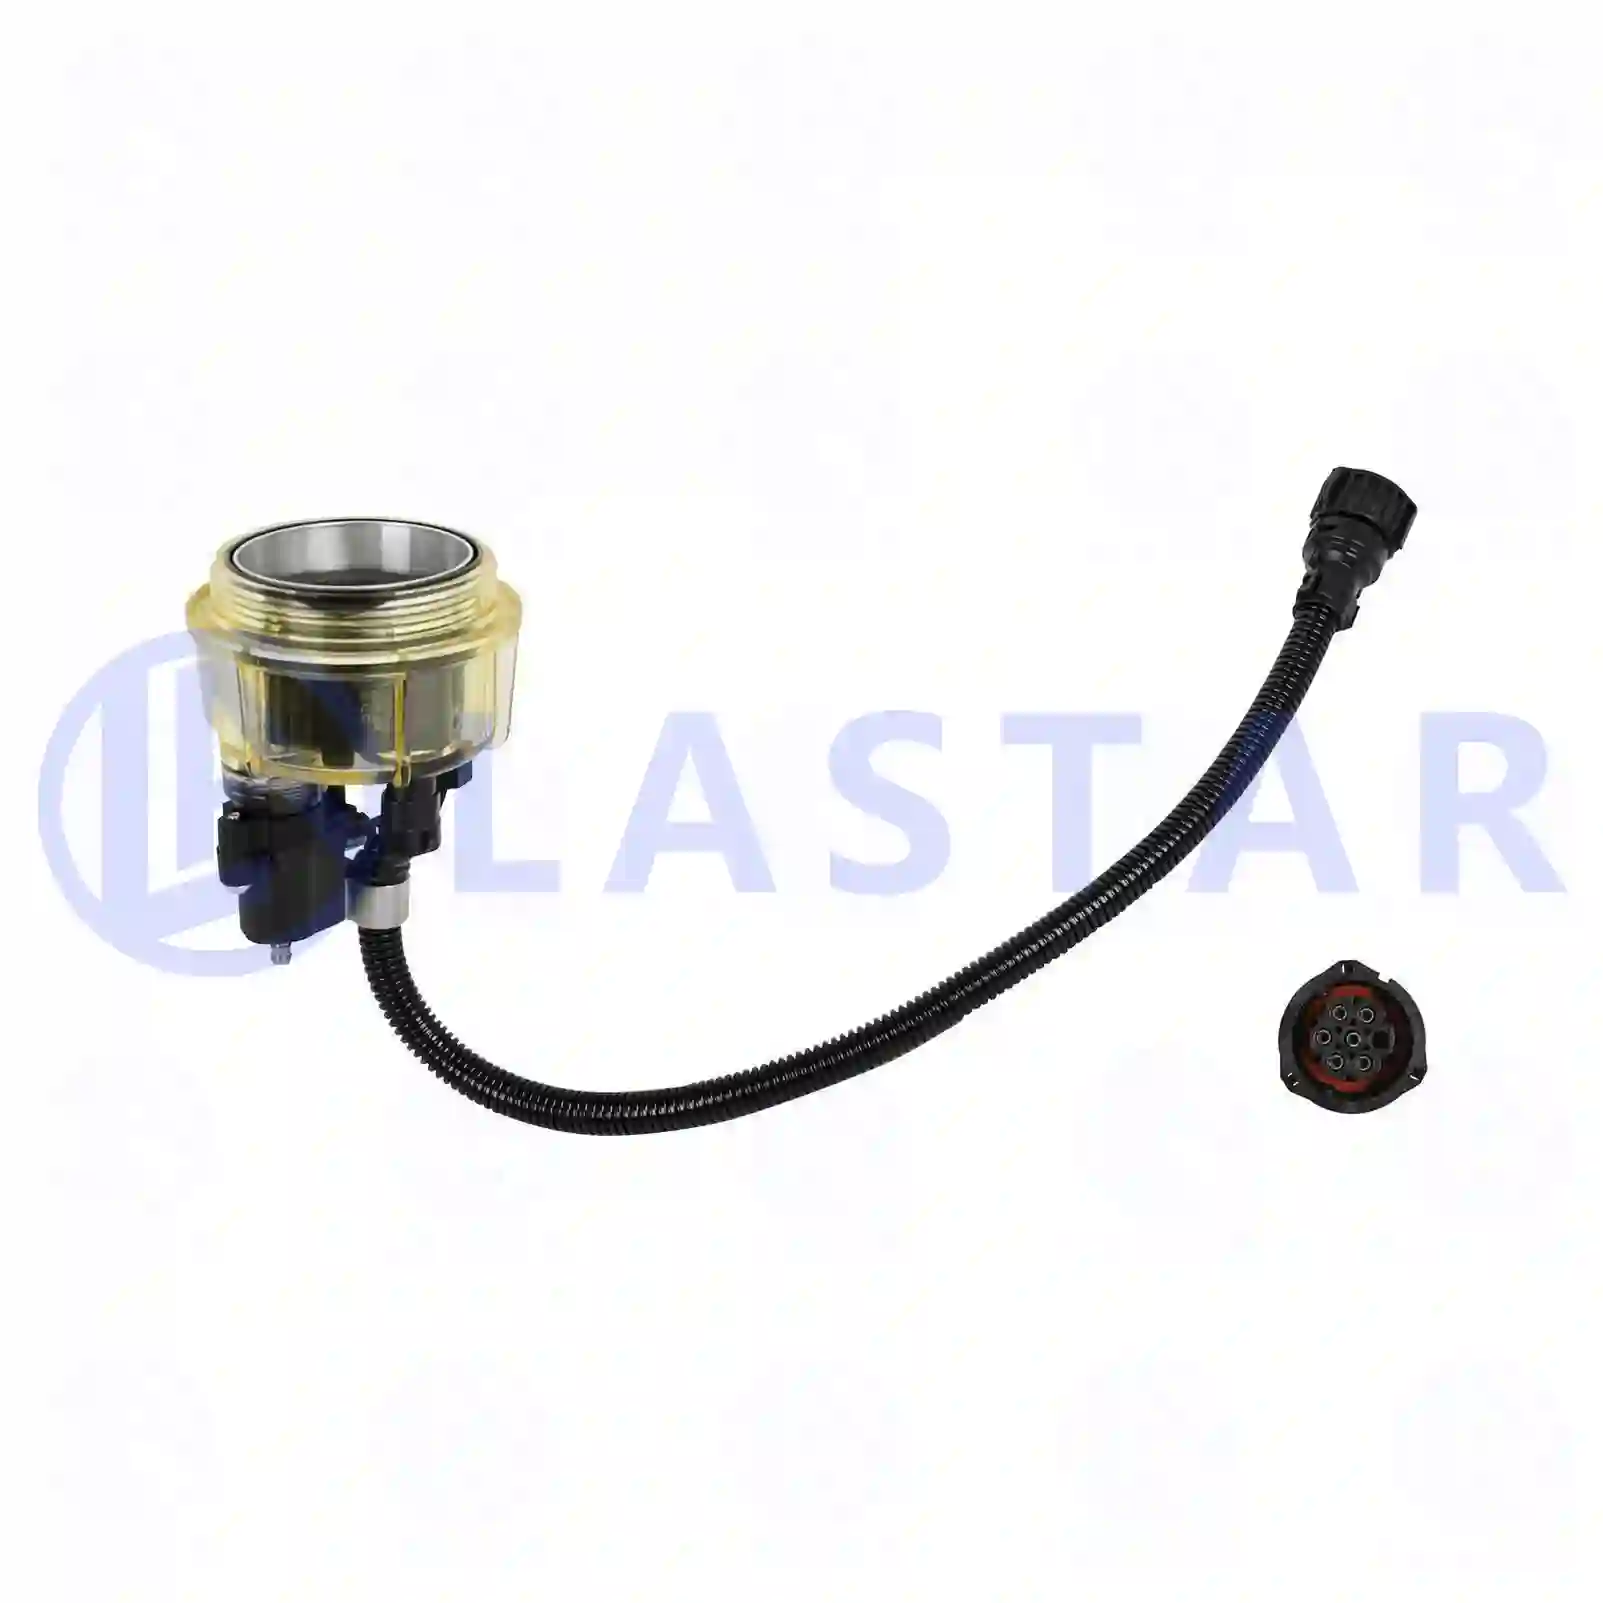 Collecting pan, fuel filter, heated, 77723952, 7420875073, 20808386, 20870050, 20875073 ||  77723952 Lastar Spare Part | Truck Spare Parts, Auotomotive Spare Parts Collecting pan, fuel filter, heated, 77723952, 7420875073, 20808386, 20870050, 20875073 ||  77723952 Lastar Spare Part | Truck Spare Parts, Auotomotive Spare Parts